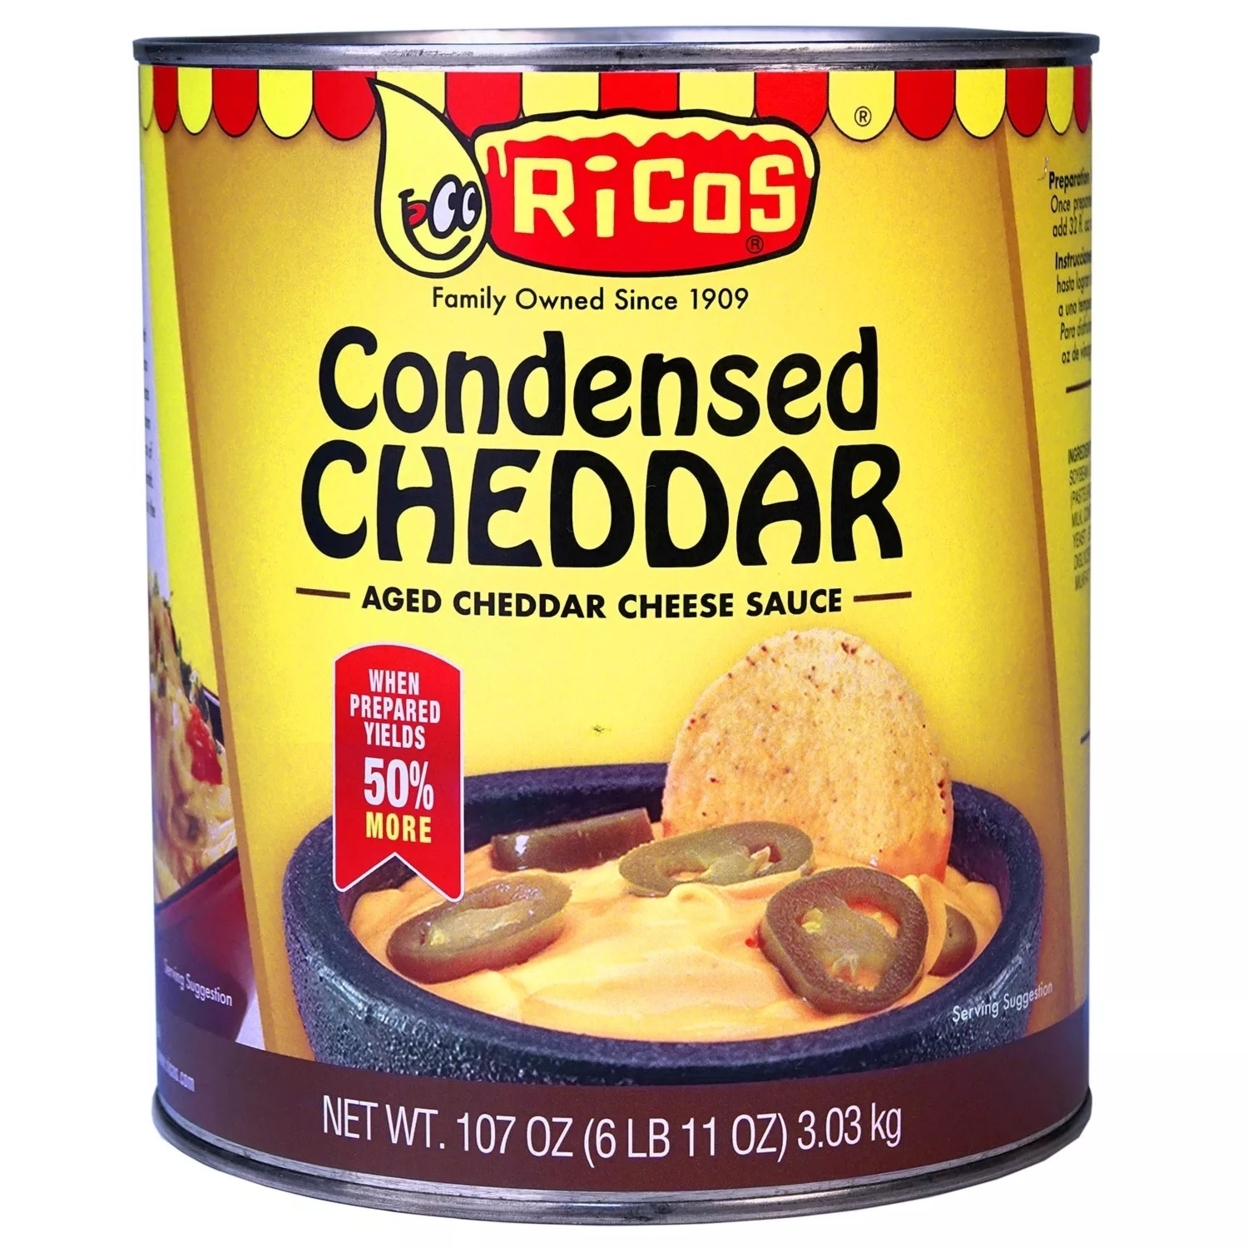 Ricos Condensed Cheddar Cheese Sauce (107 Ounce)